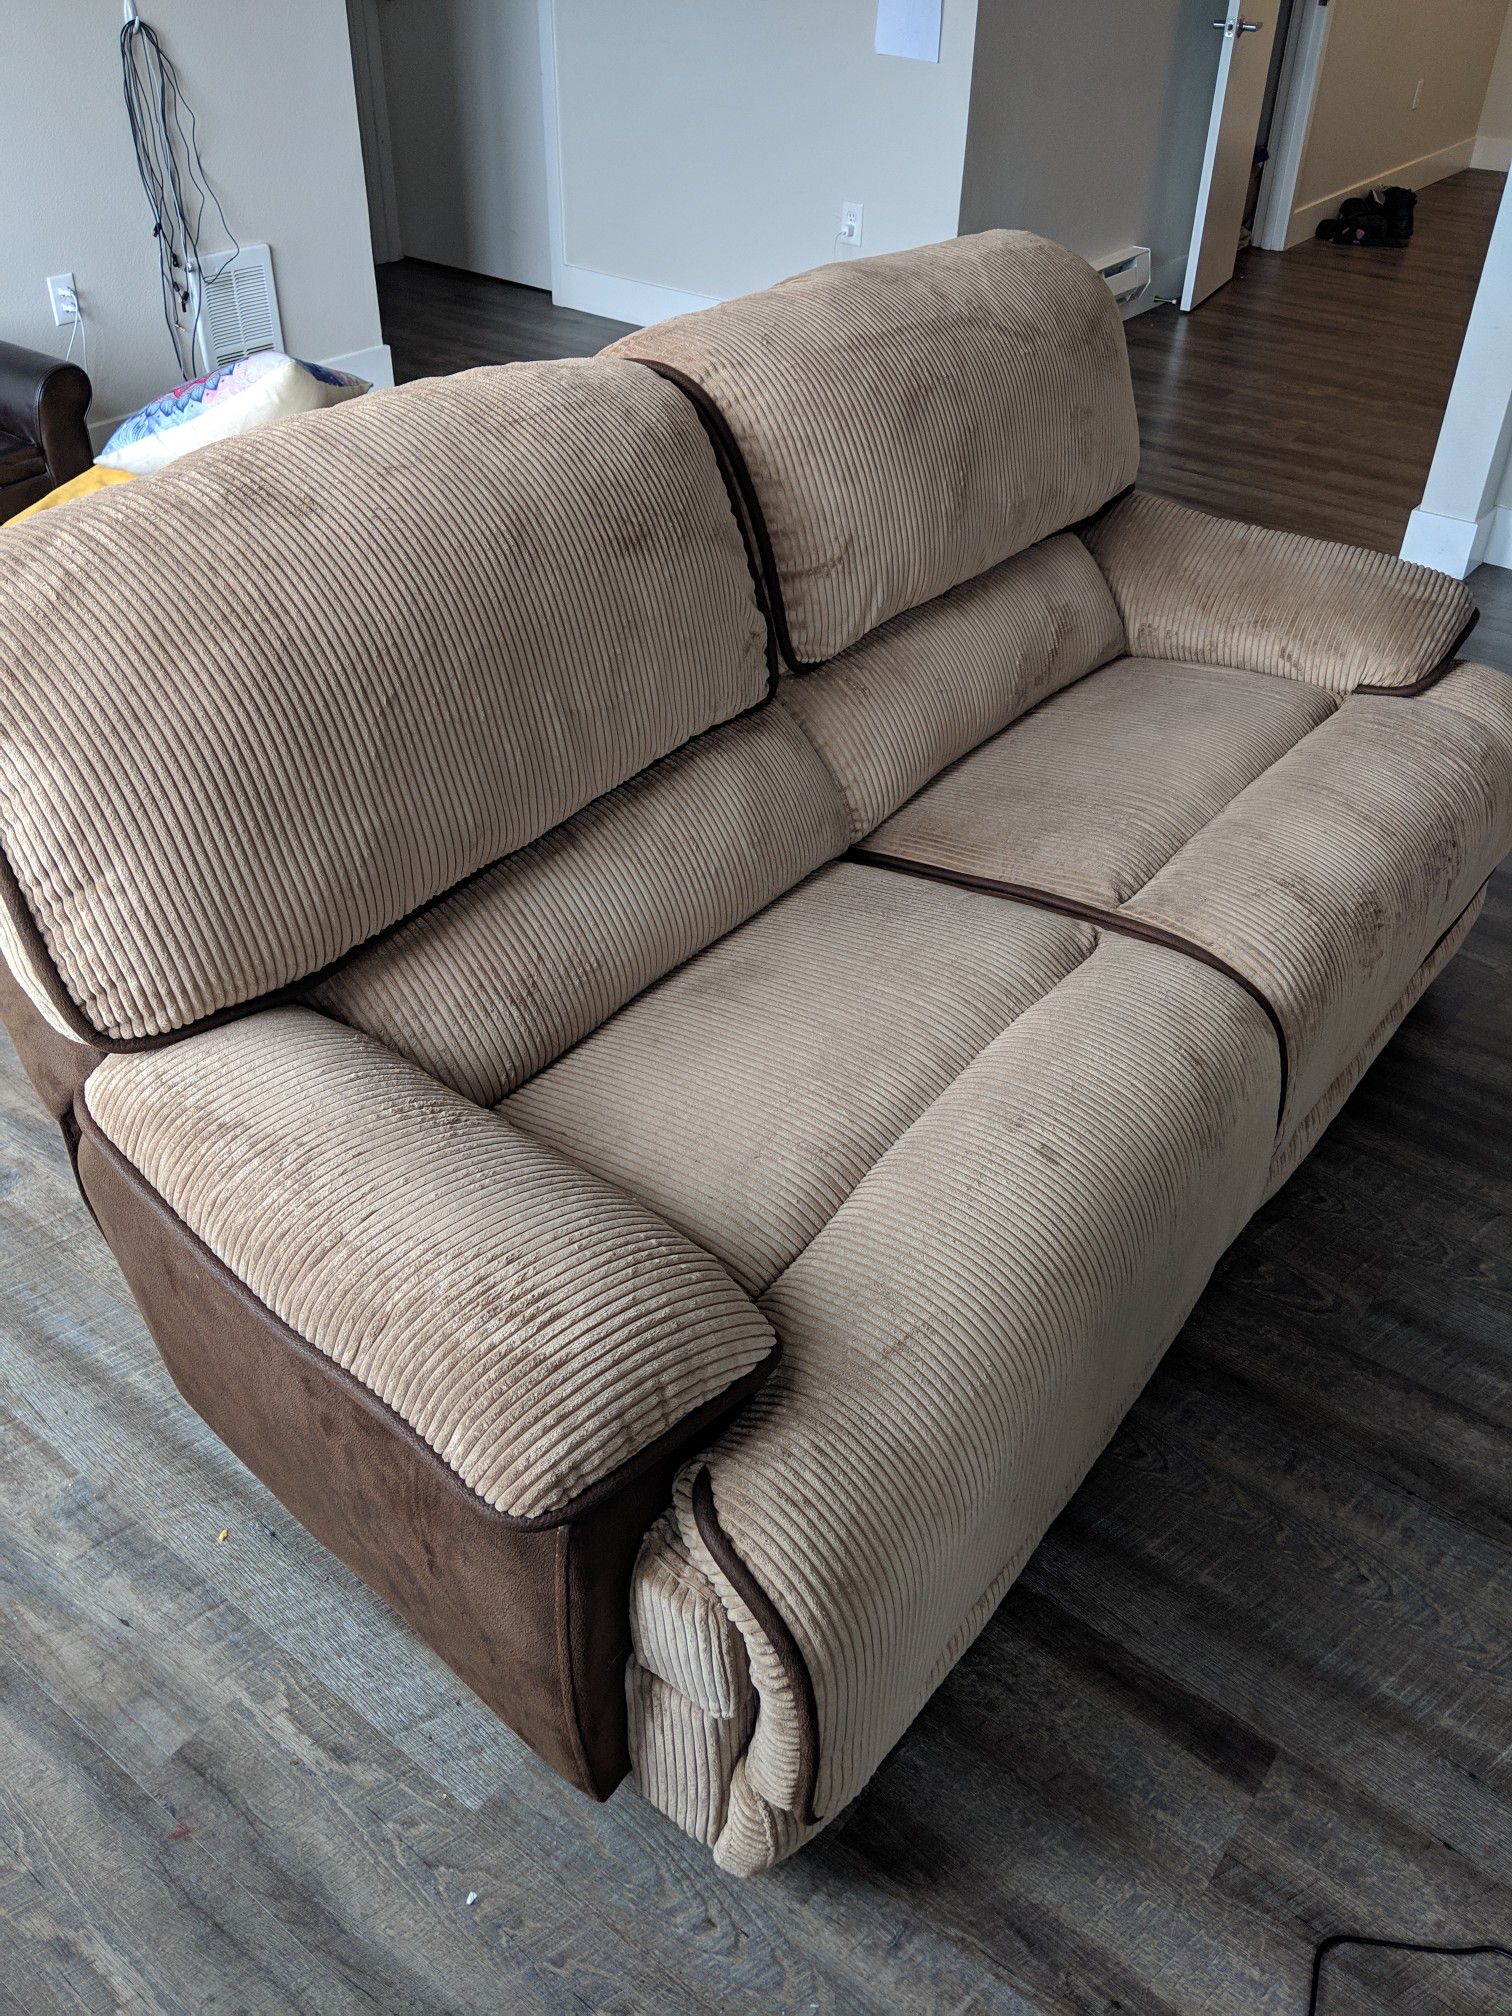 Wide recliner loveseat sofa couch